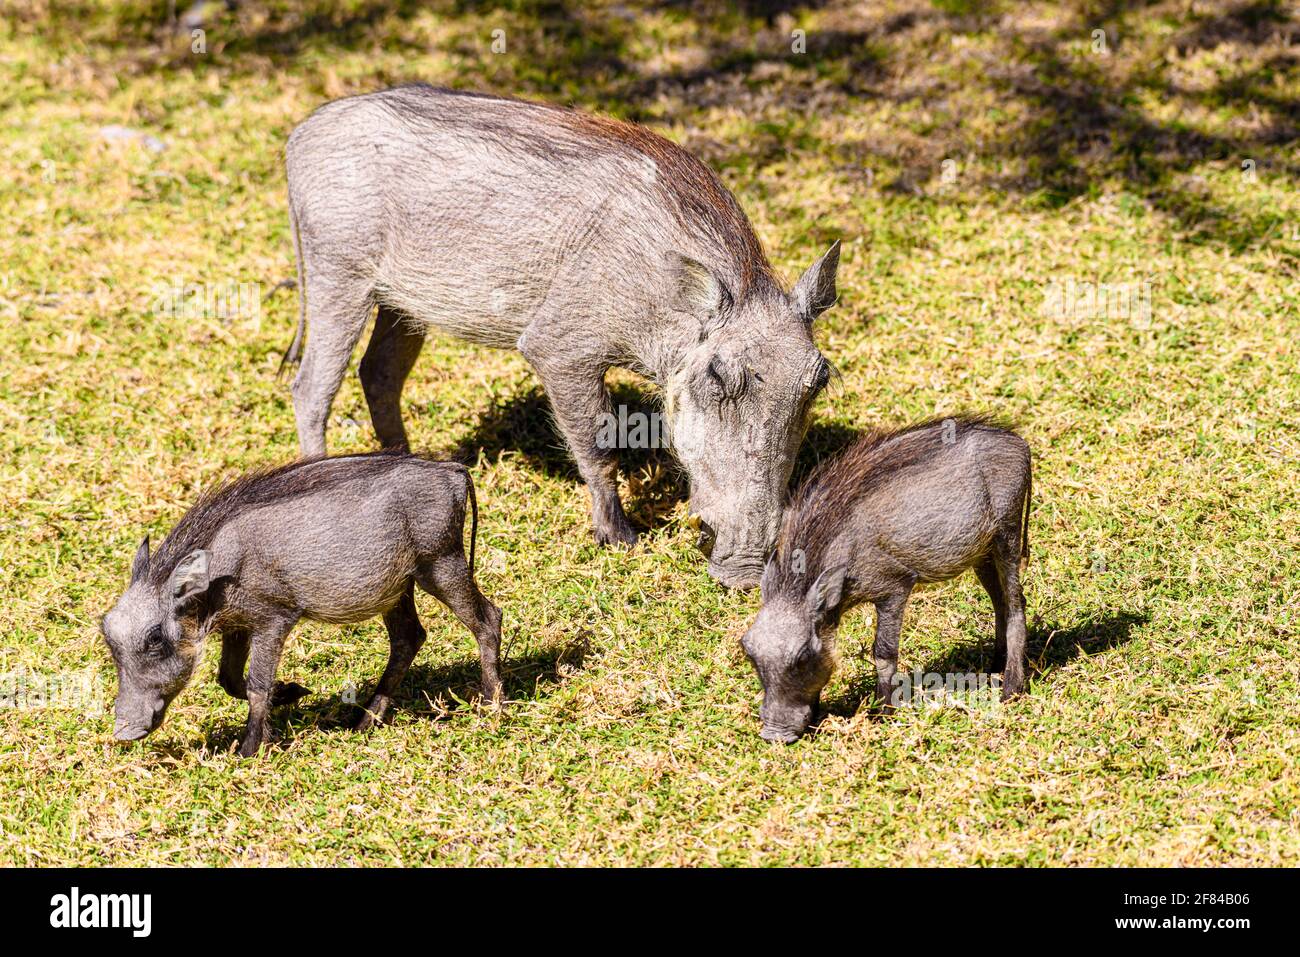 A mother warthog with two hoglets eat grass, Namibia Stock Photo